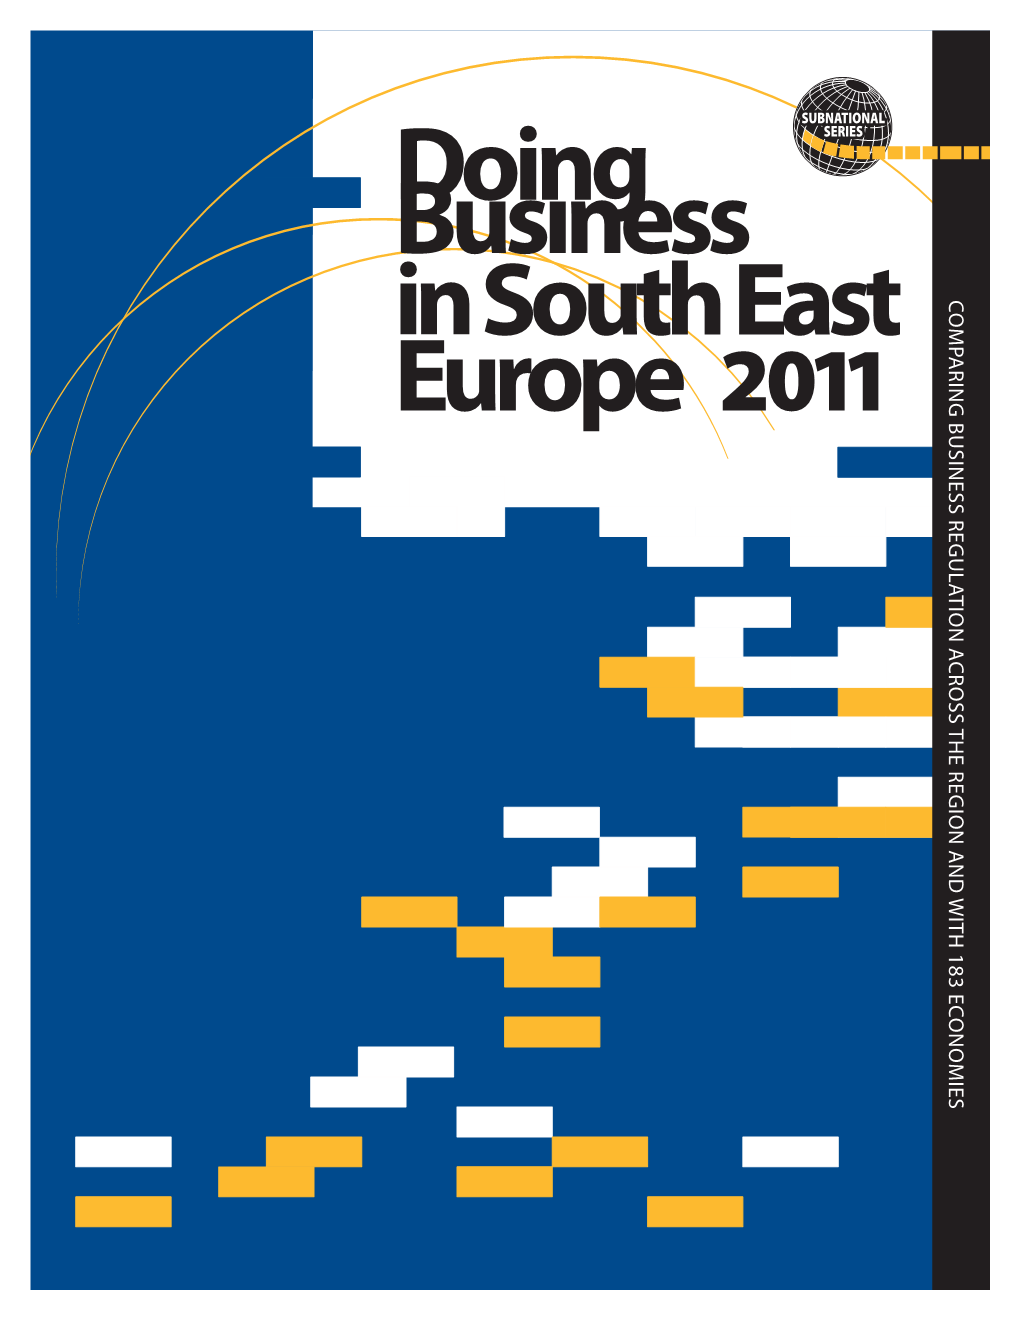 Doing Business in South East Europe 2011 and Other Subnational and Regional Doing Business Studies Can Be Downloaded at No Charge At